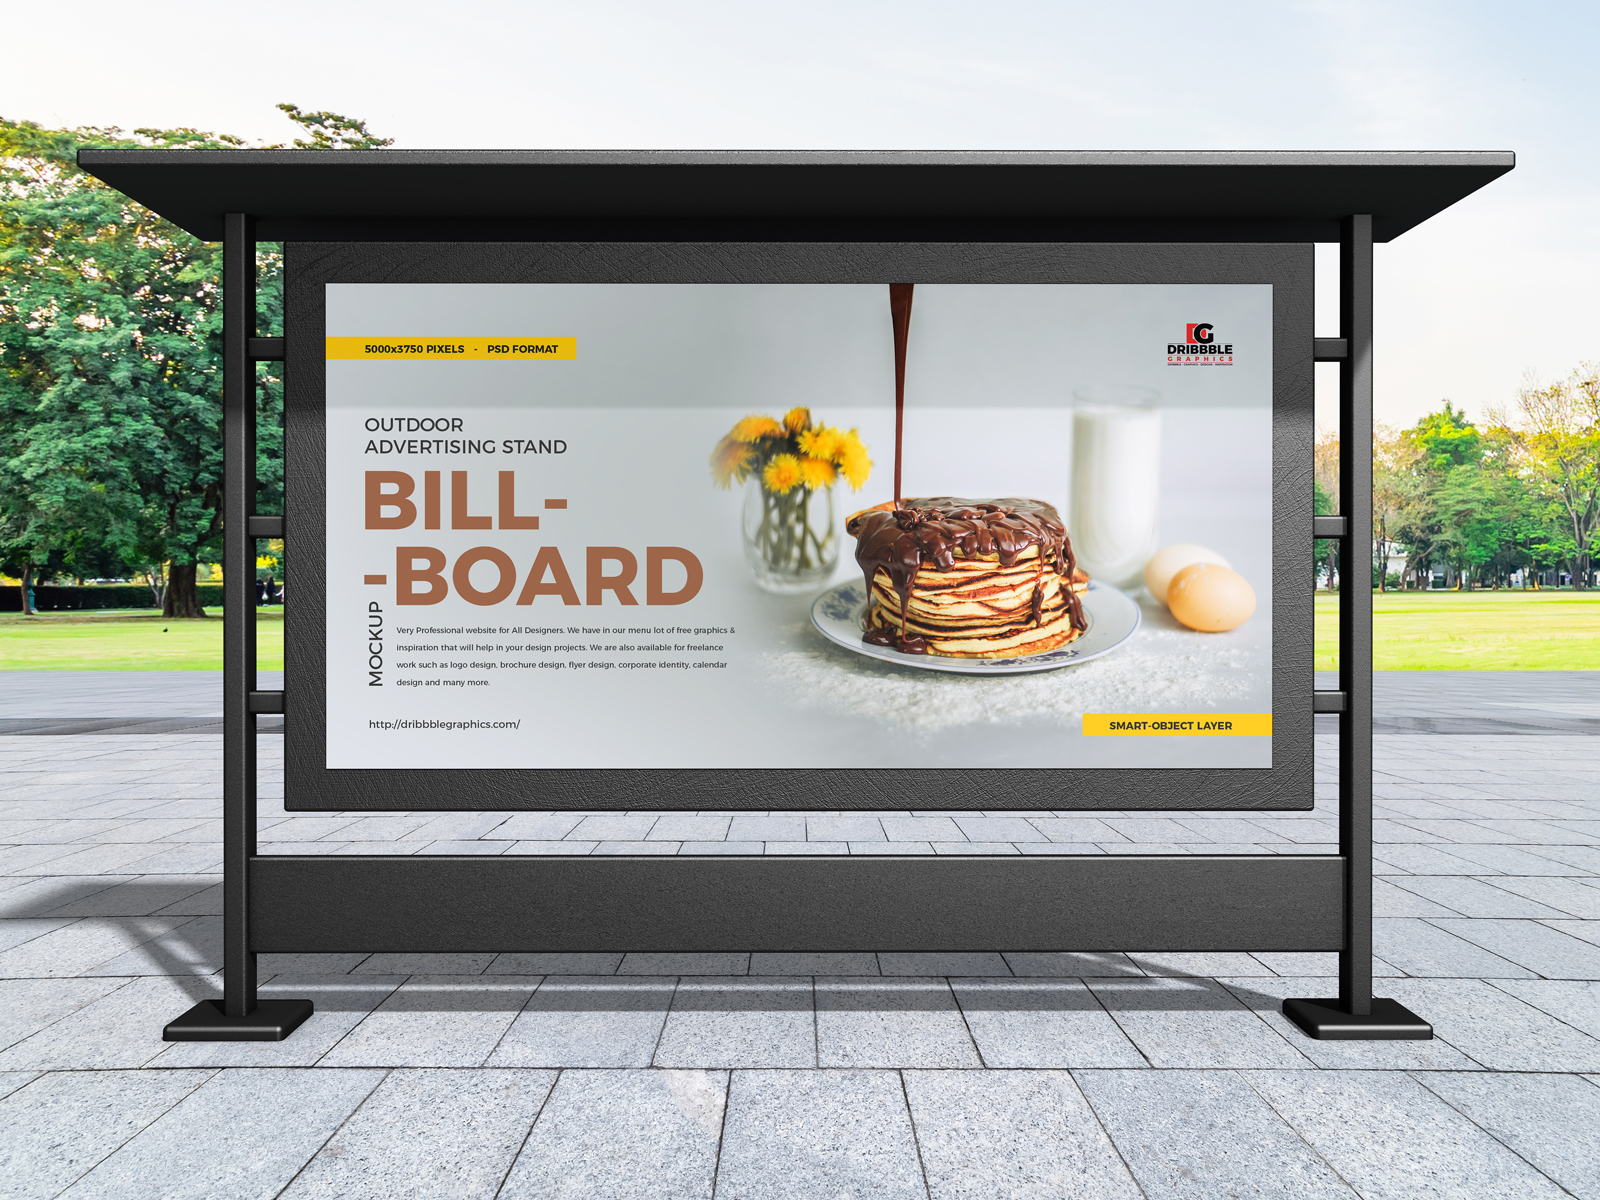 Free Outdoor Advertising Stand Billboard Mockup by Jessica Elle on Dribbble